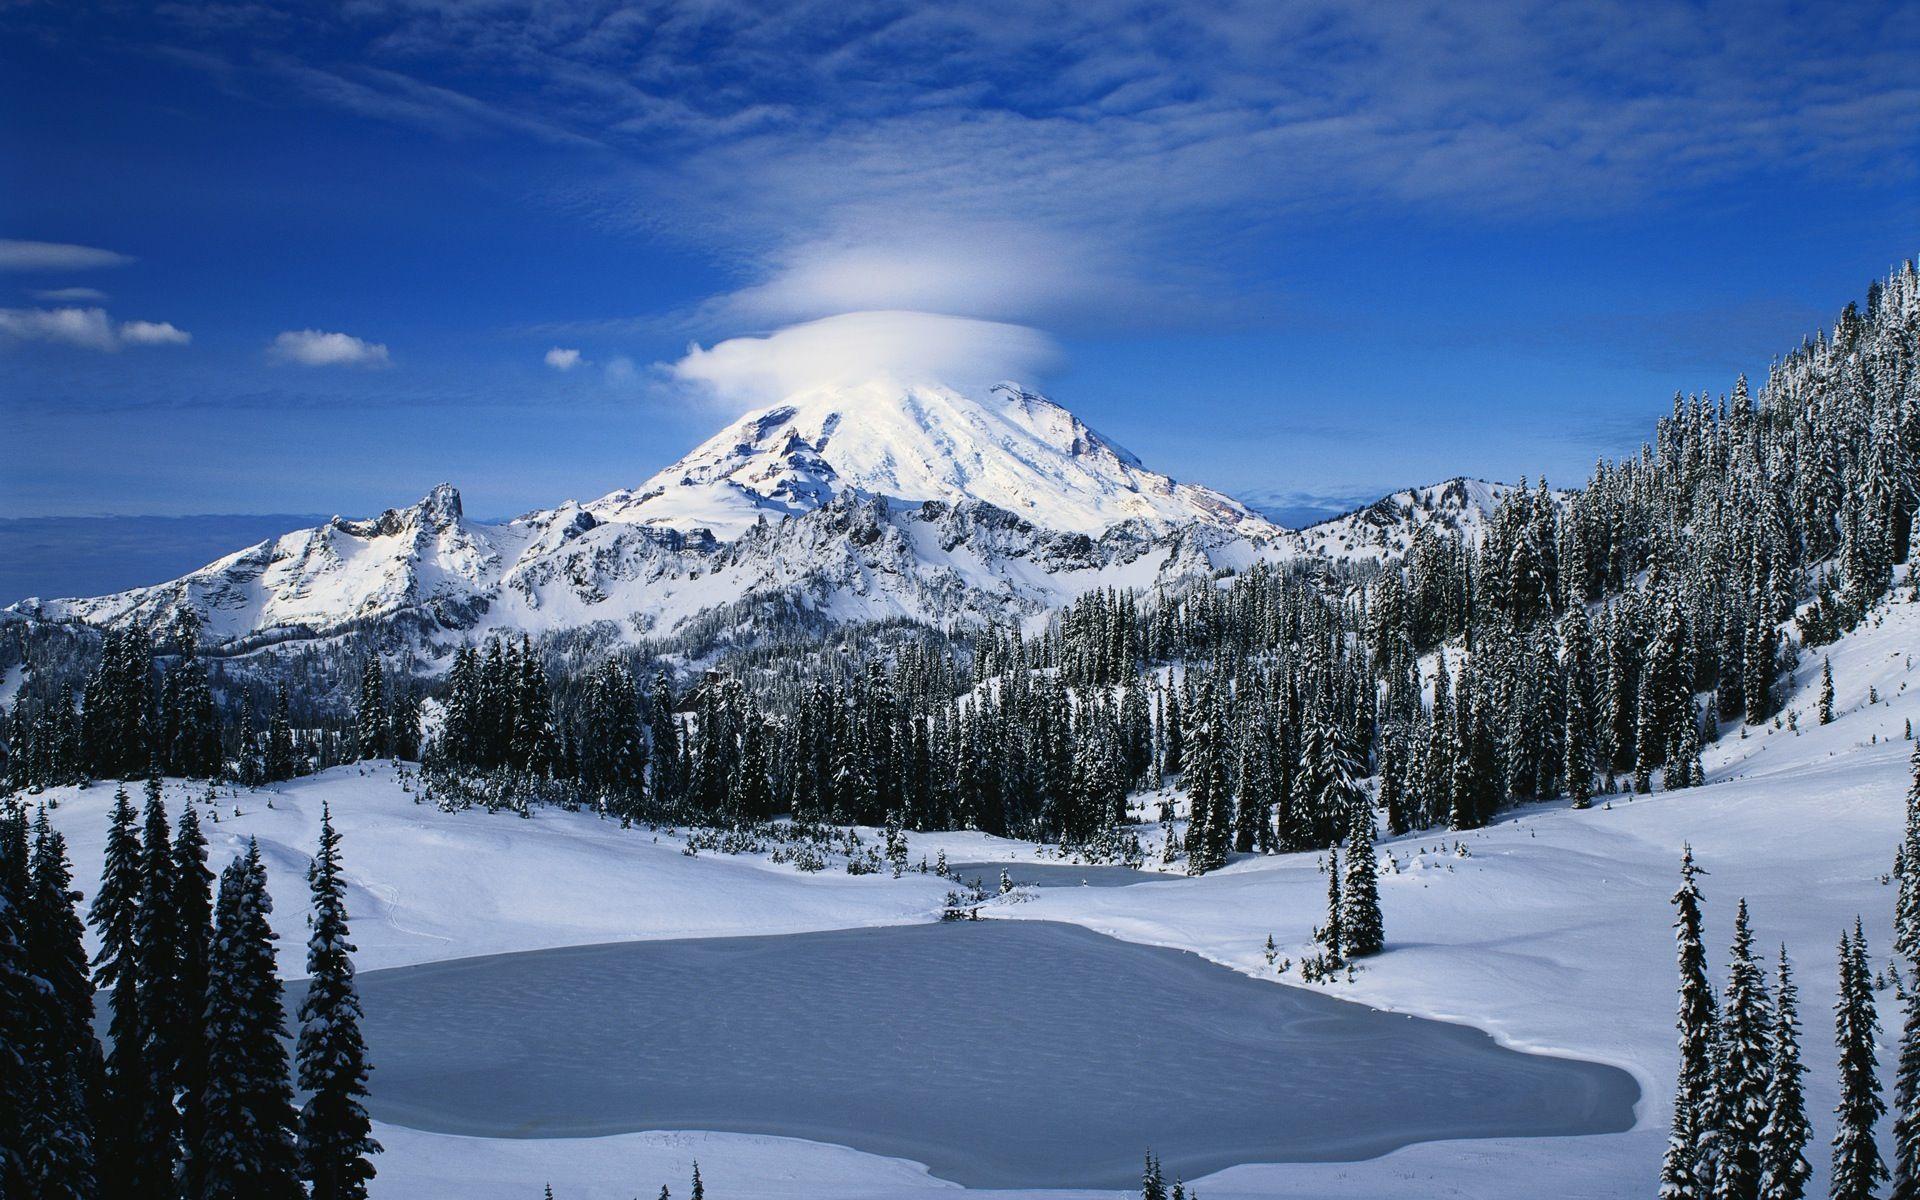 Stunning Mountain View in Winter Time widescreen wallpaper. Wide